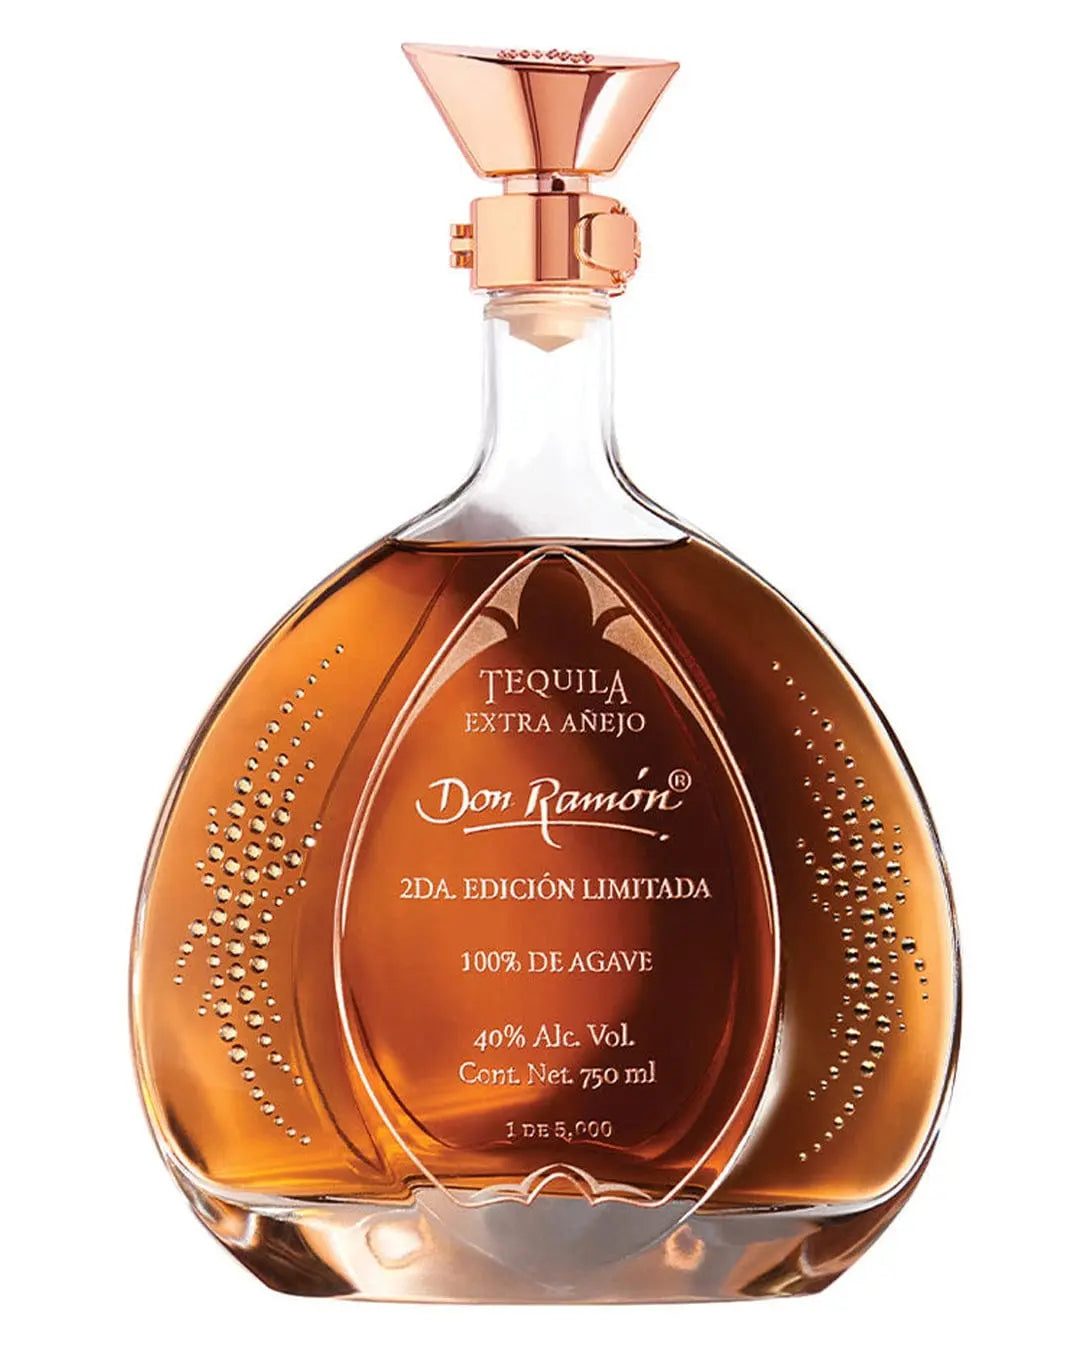 Don Ramon Tequila Extra Añejo Limited Edition Crystals from Swarovski, 75 cl | Pierce Brosnan Tequila & Mezcal